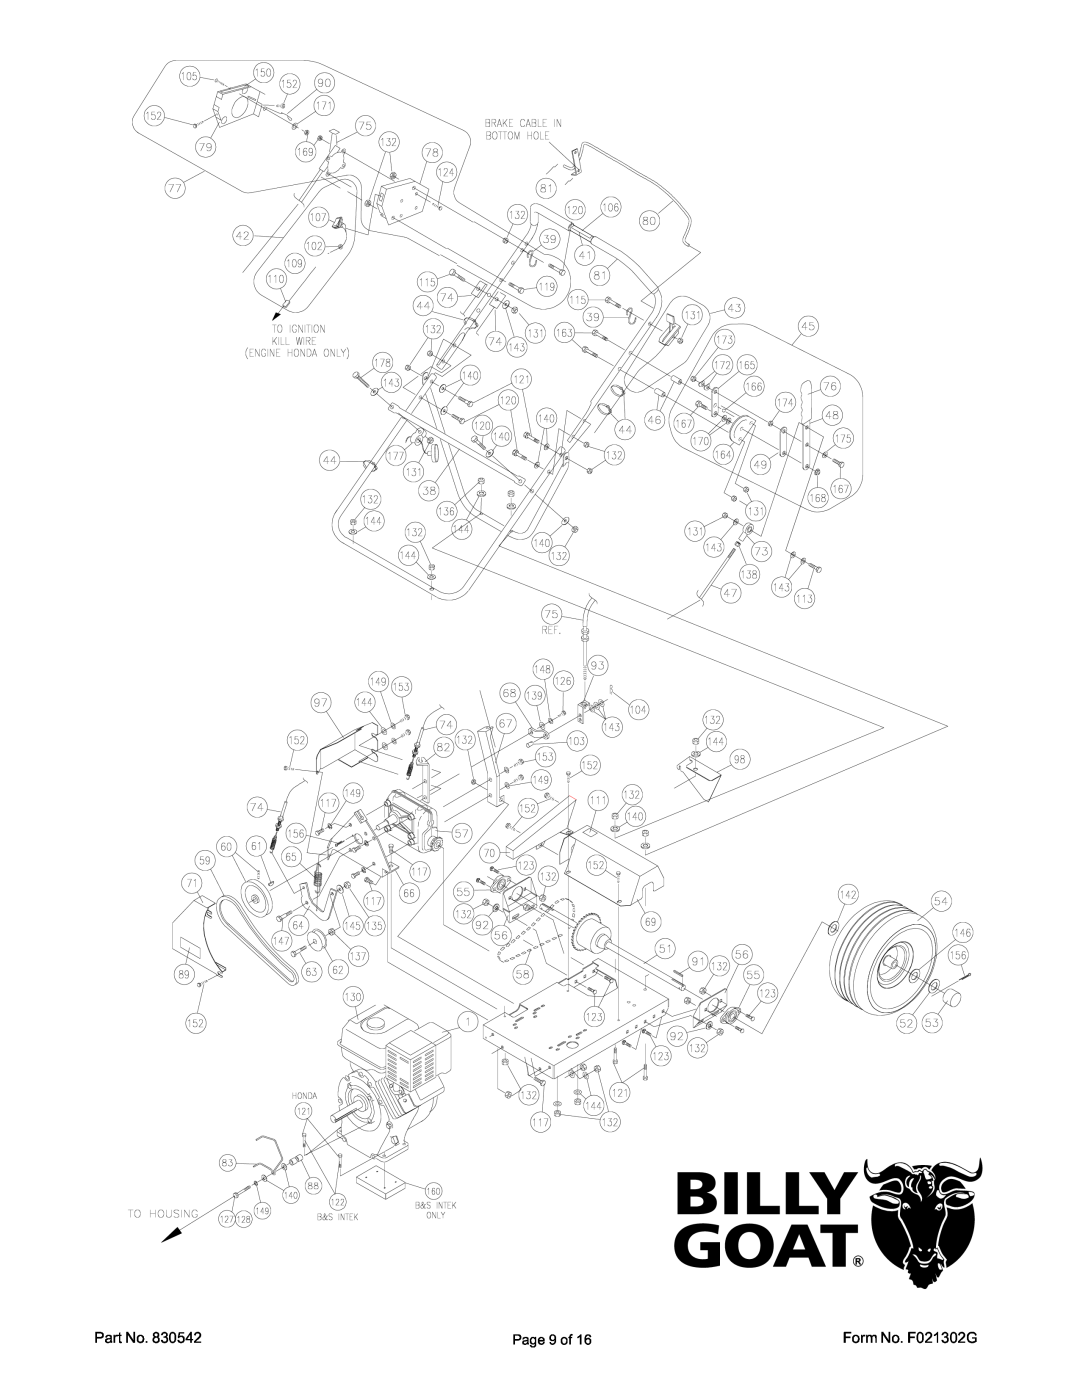 Billy Goat VQ1002SP, VQ802SPH specifications Page 9 of, Form No. F021302G 